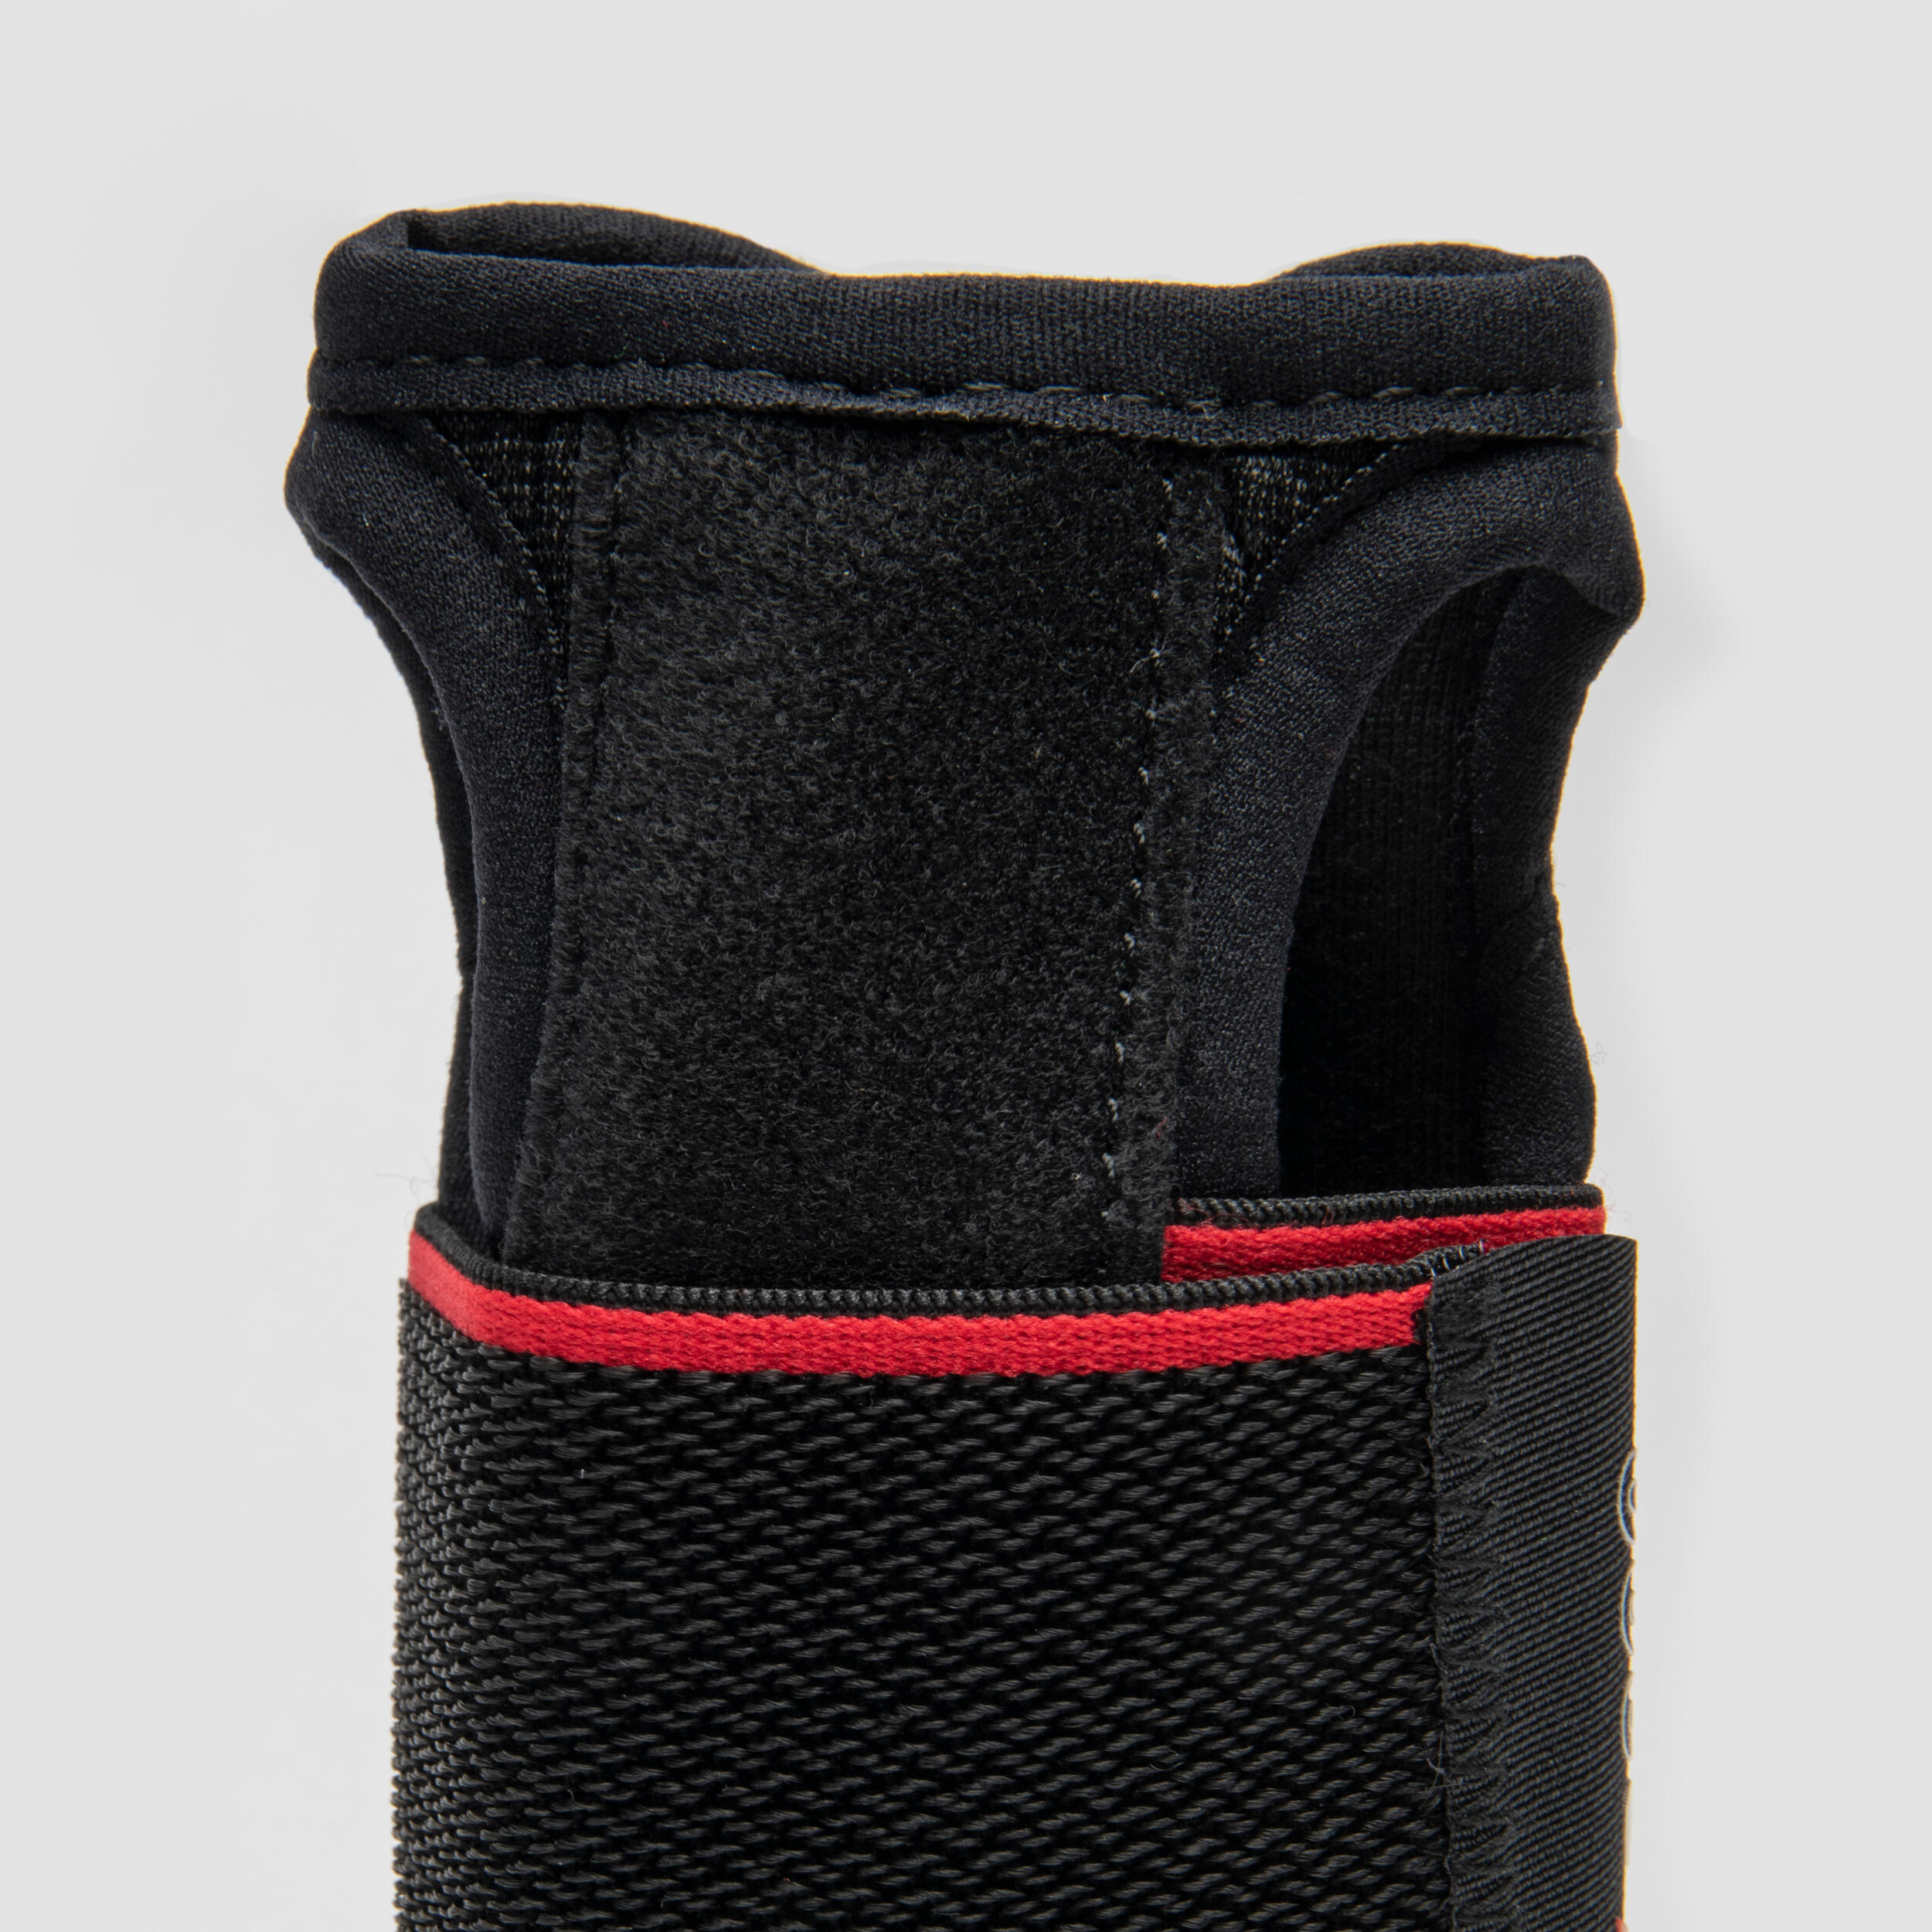 Adult Left/Right Wrist Support Strap R900 - Black 5/7